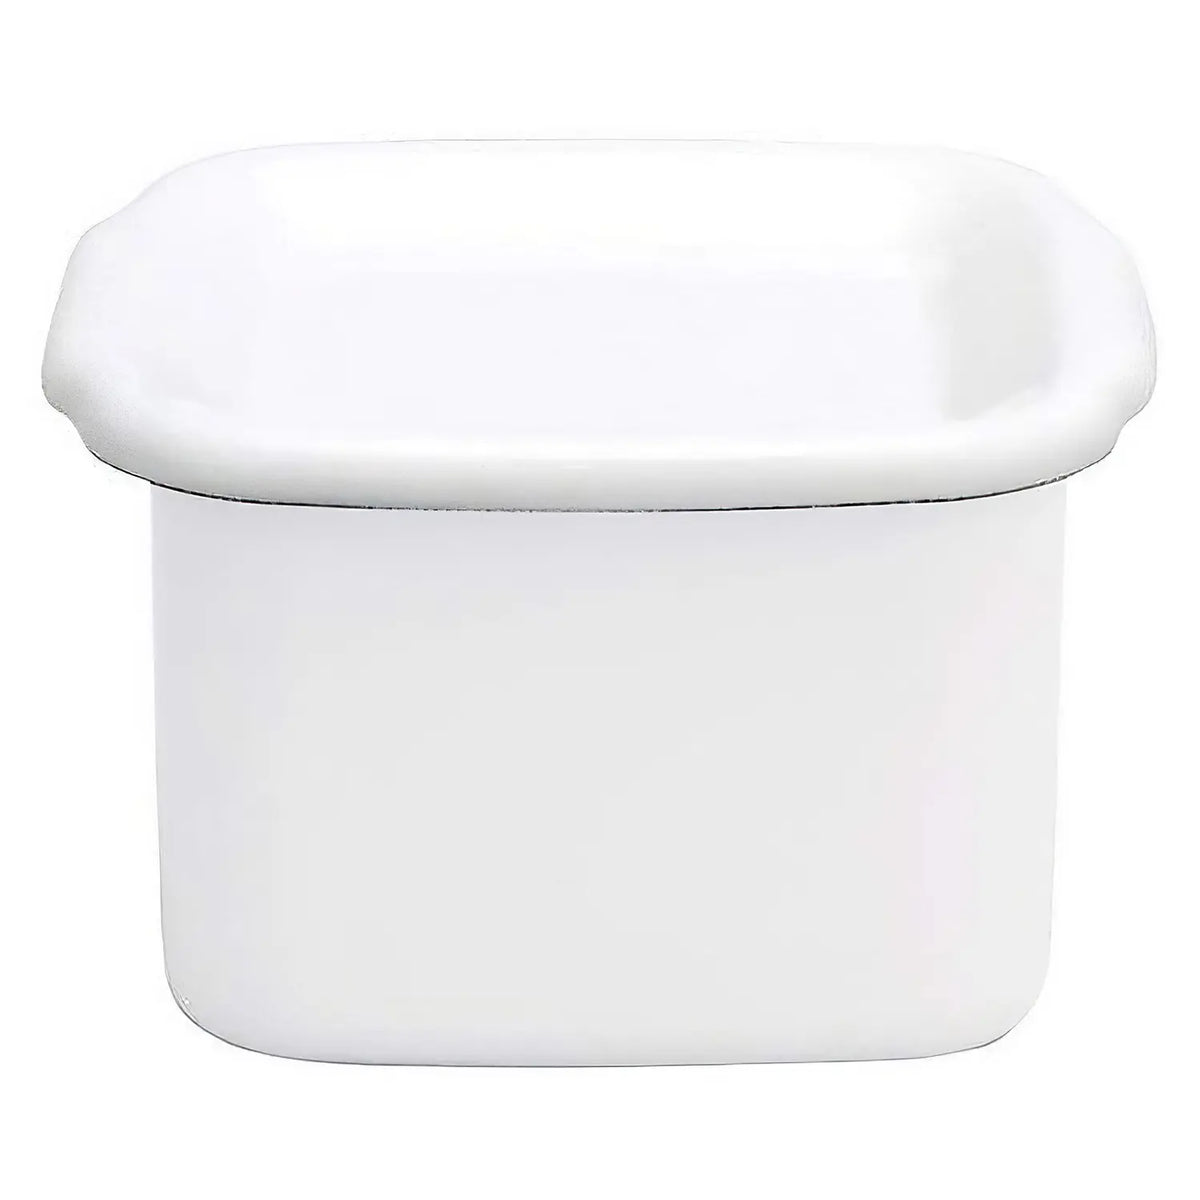 Noda Horo White Series Enamel Square Food Containers with Enamel Lid